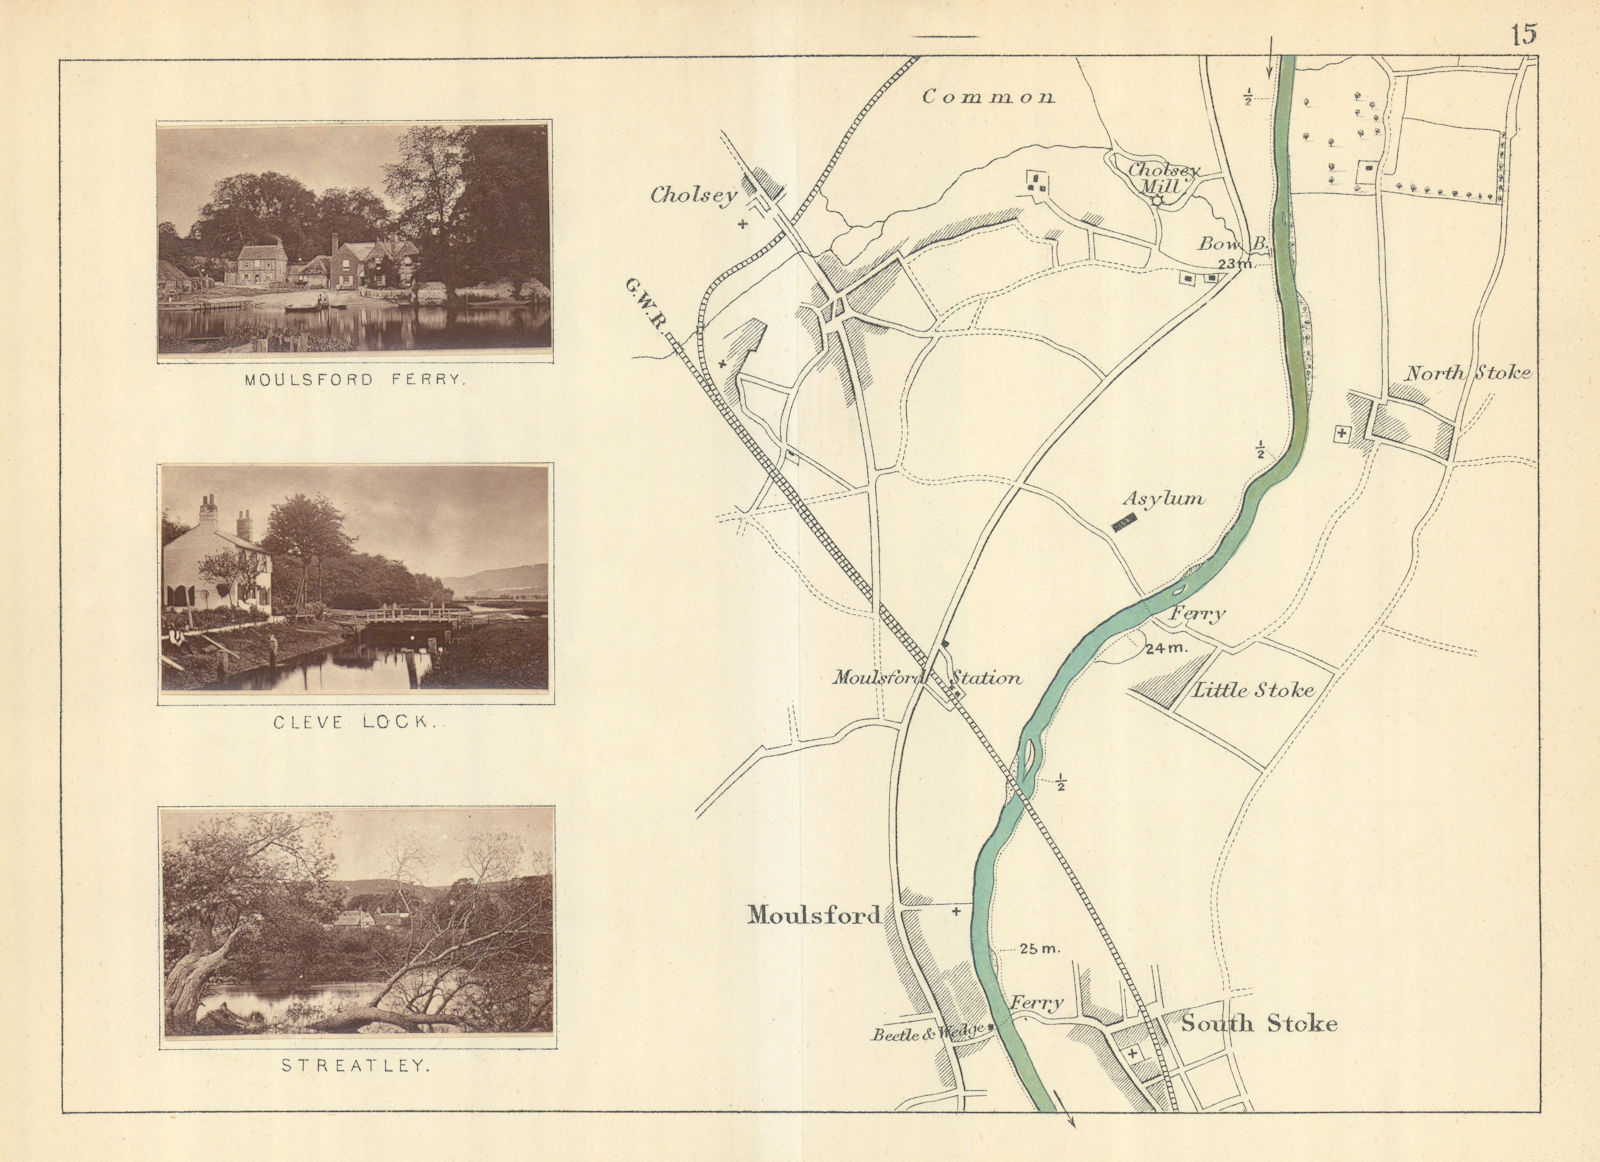 Associate Product RIVER THAMES - Cholsey - Moulsford - South Stoke. Streatley. TAUNT 1879 map